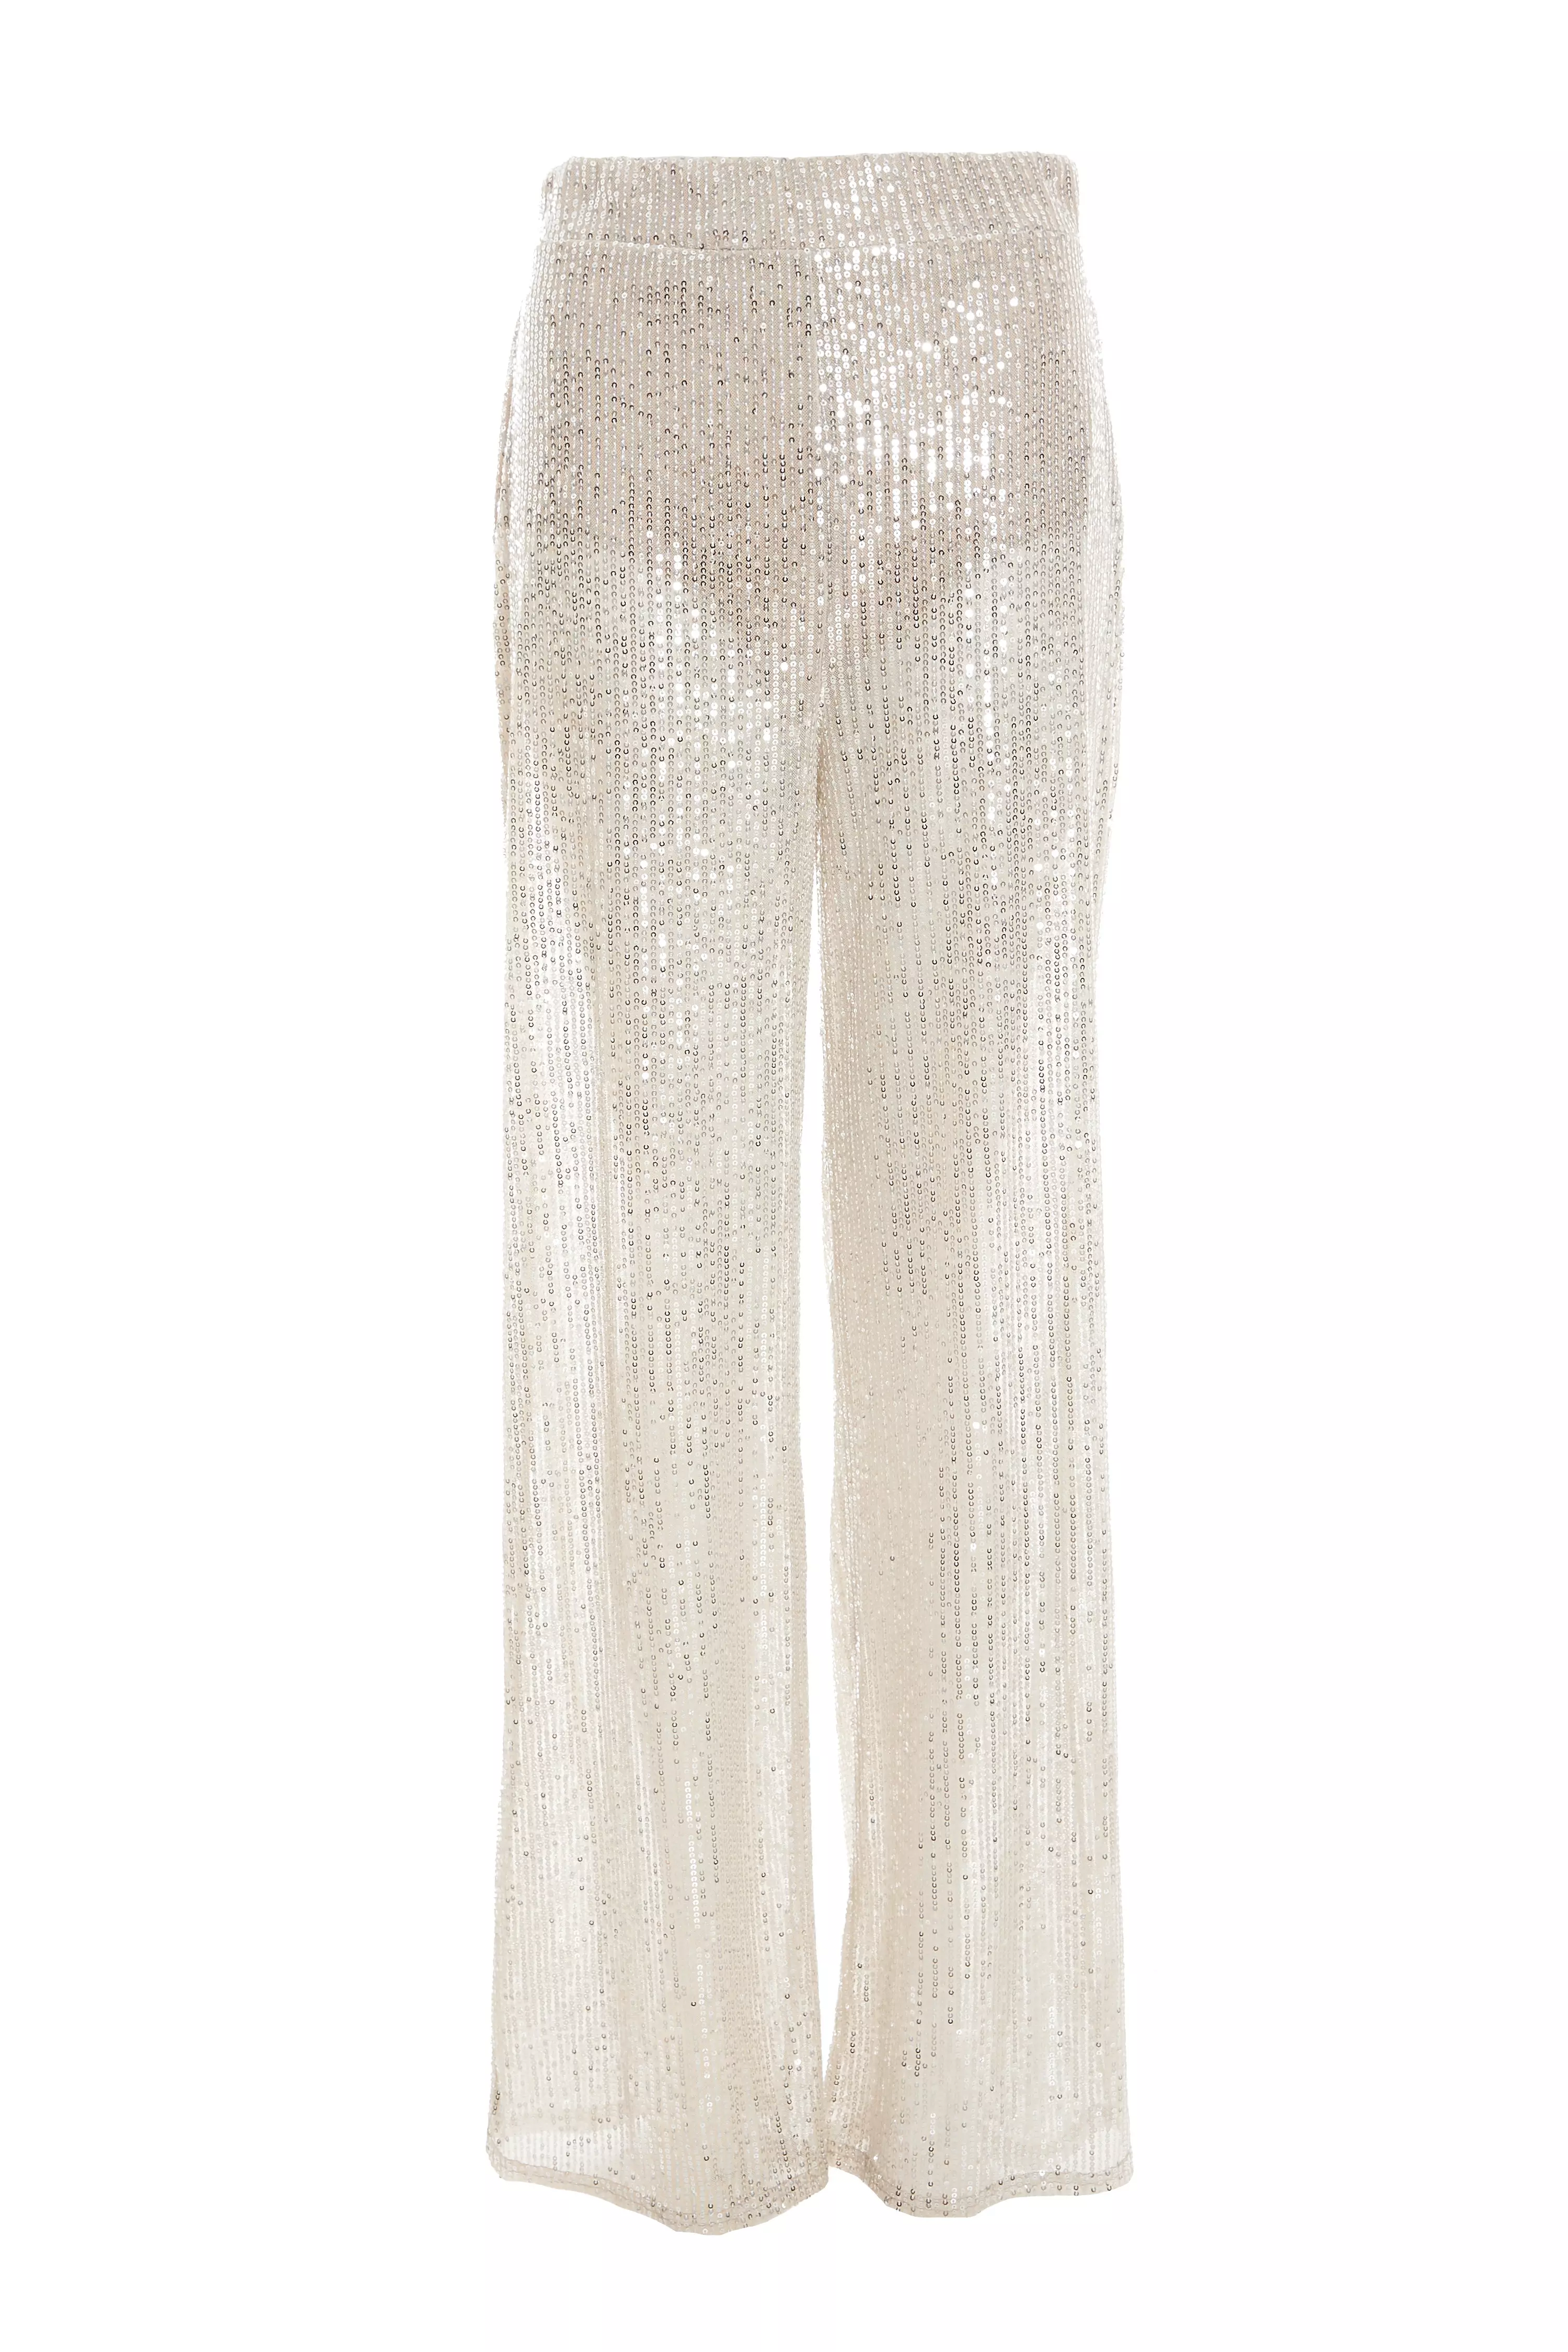 Champagne Sequin Palazzo Trousers - QUIZ Clothing